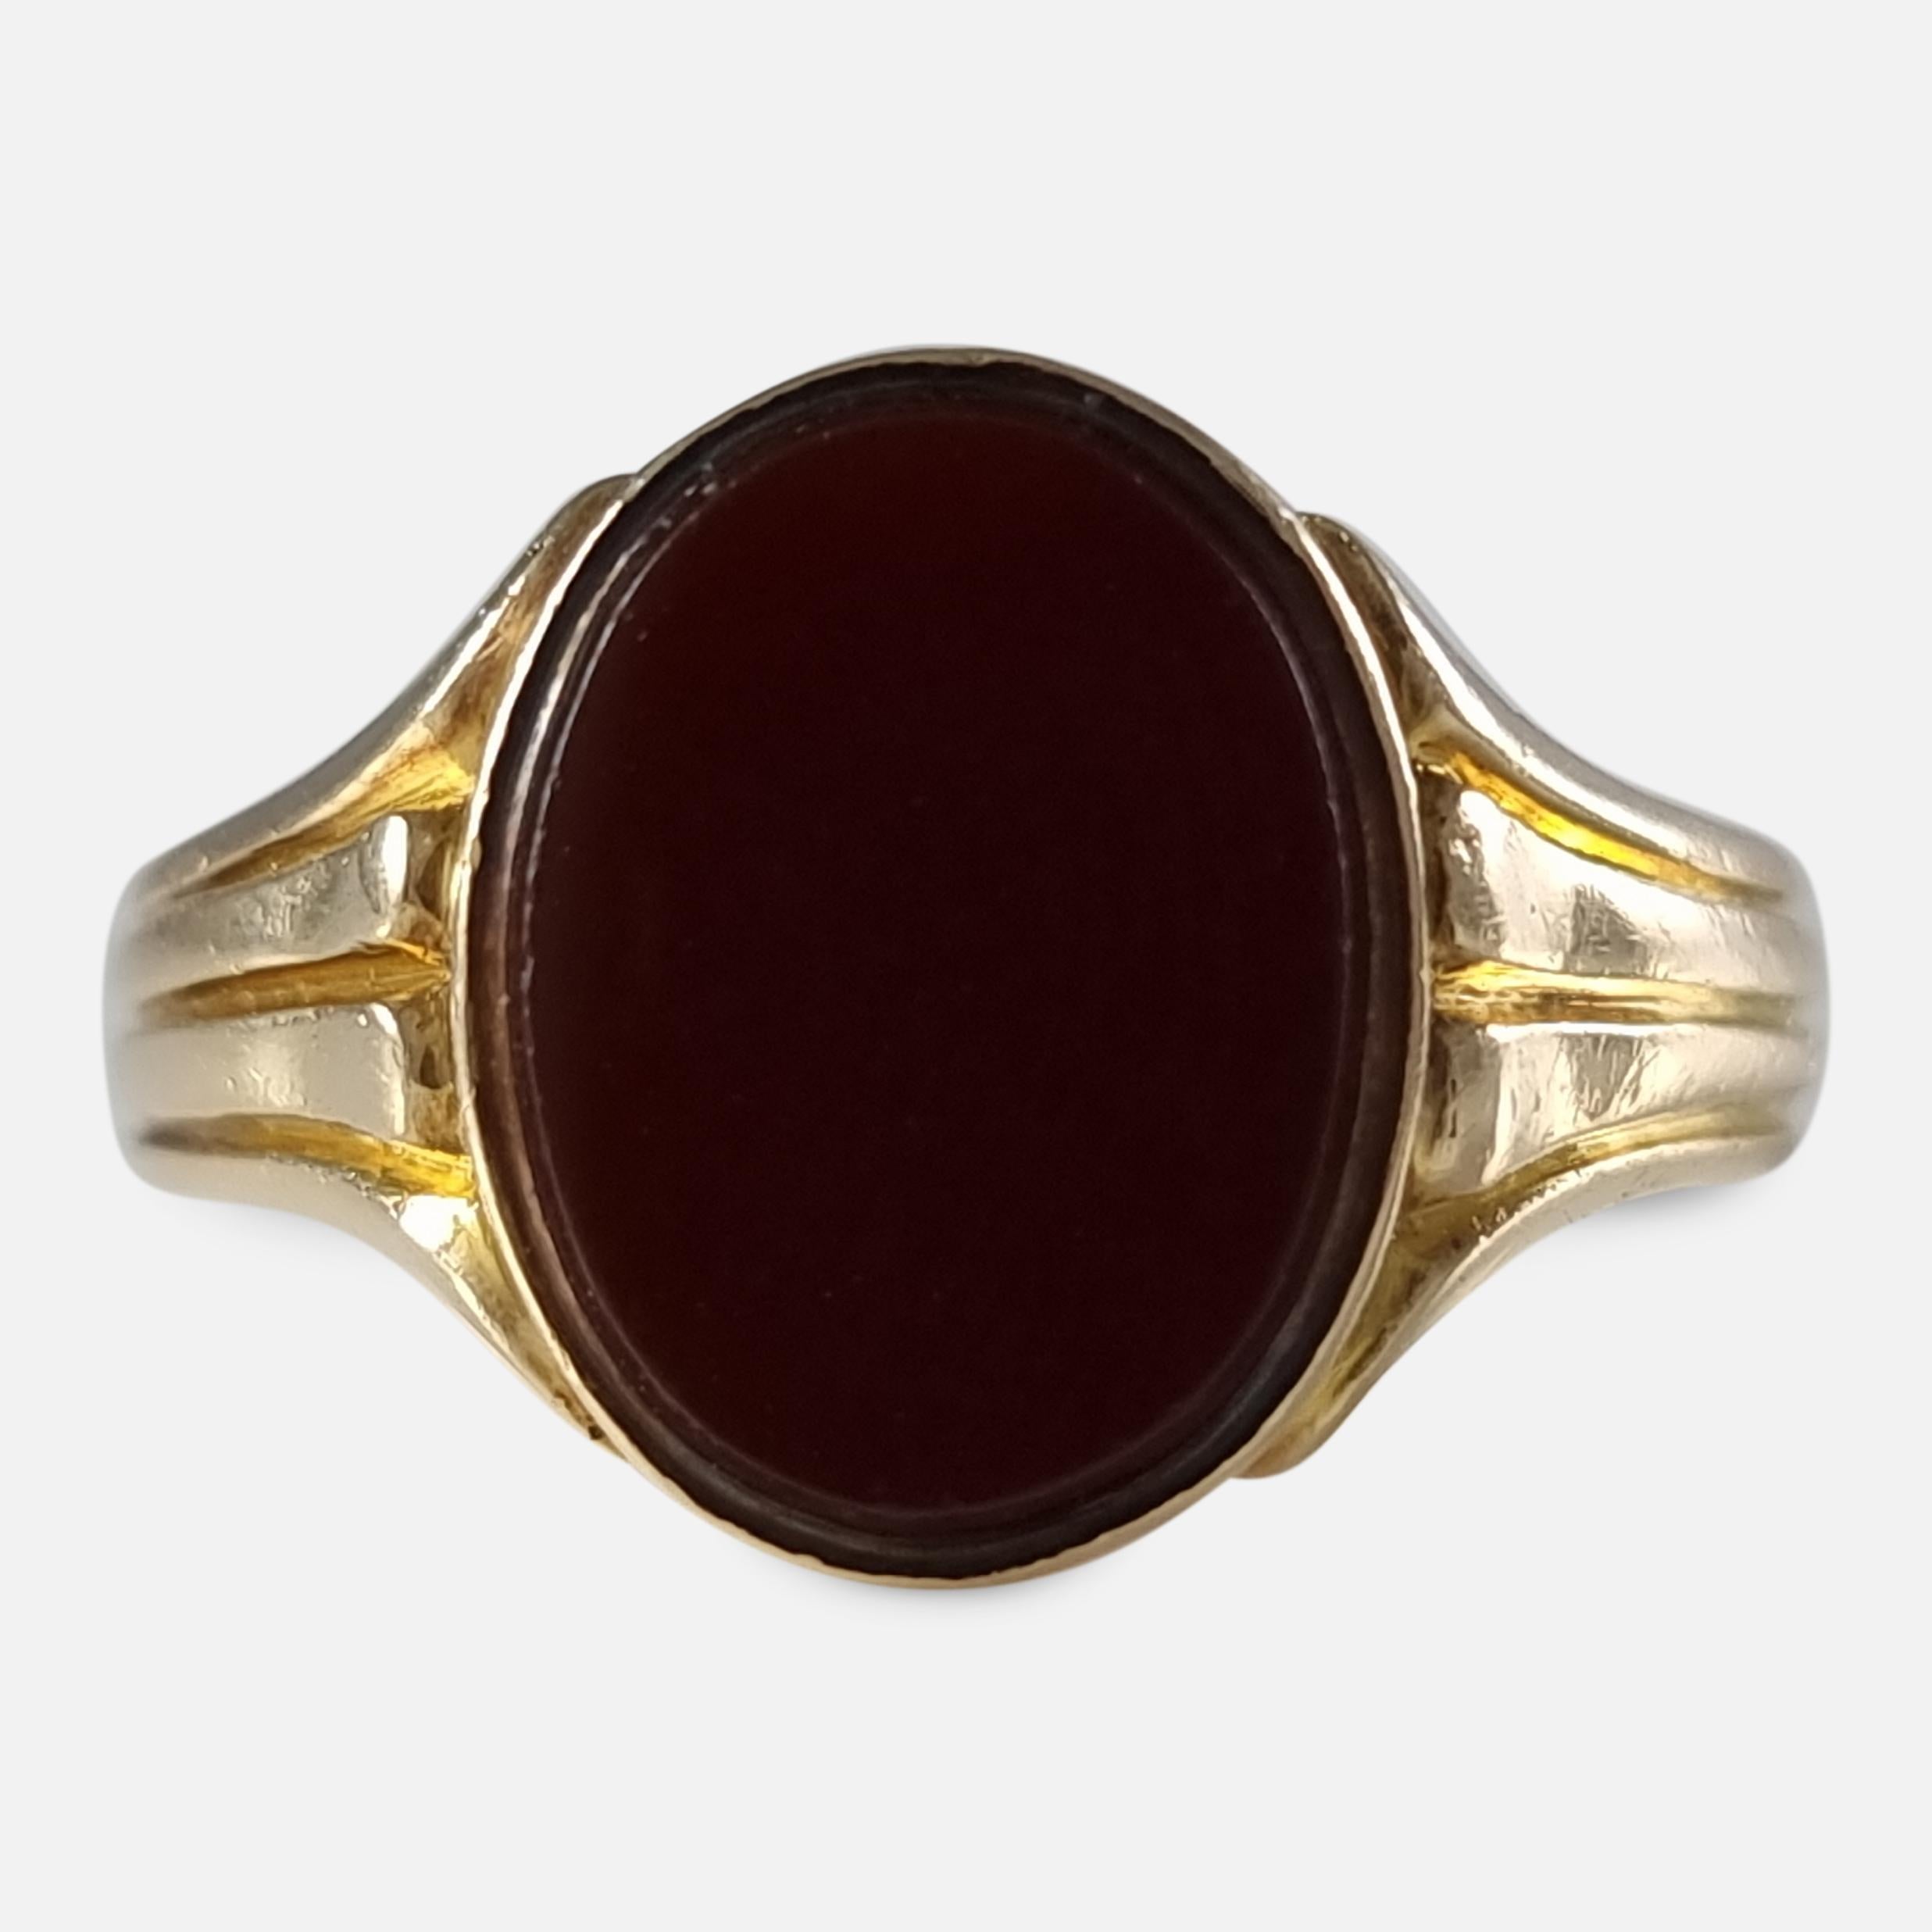 A Victorian 18ct yellow gold carnelian signet ring. The signet ring is set with an oval carnelian, leading to a reeded shank.

The ring is hallmarked with London assay office marks, the date letter 